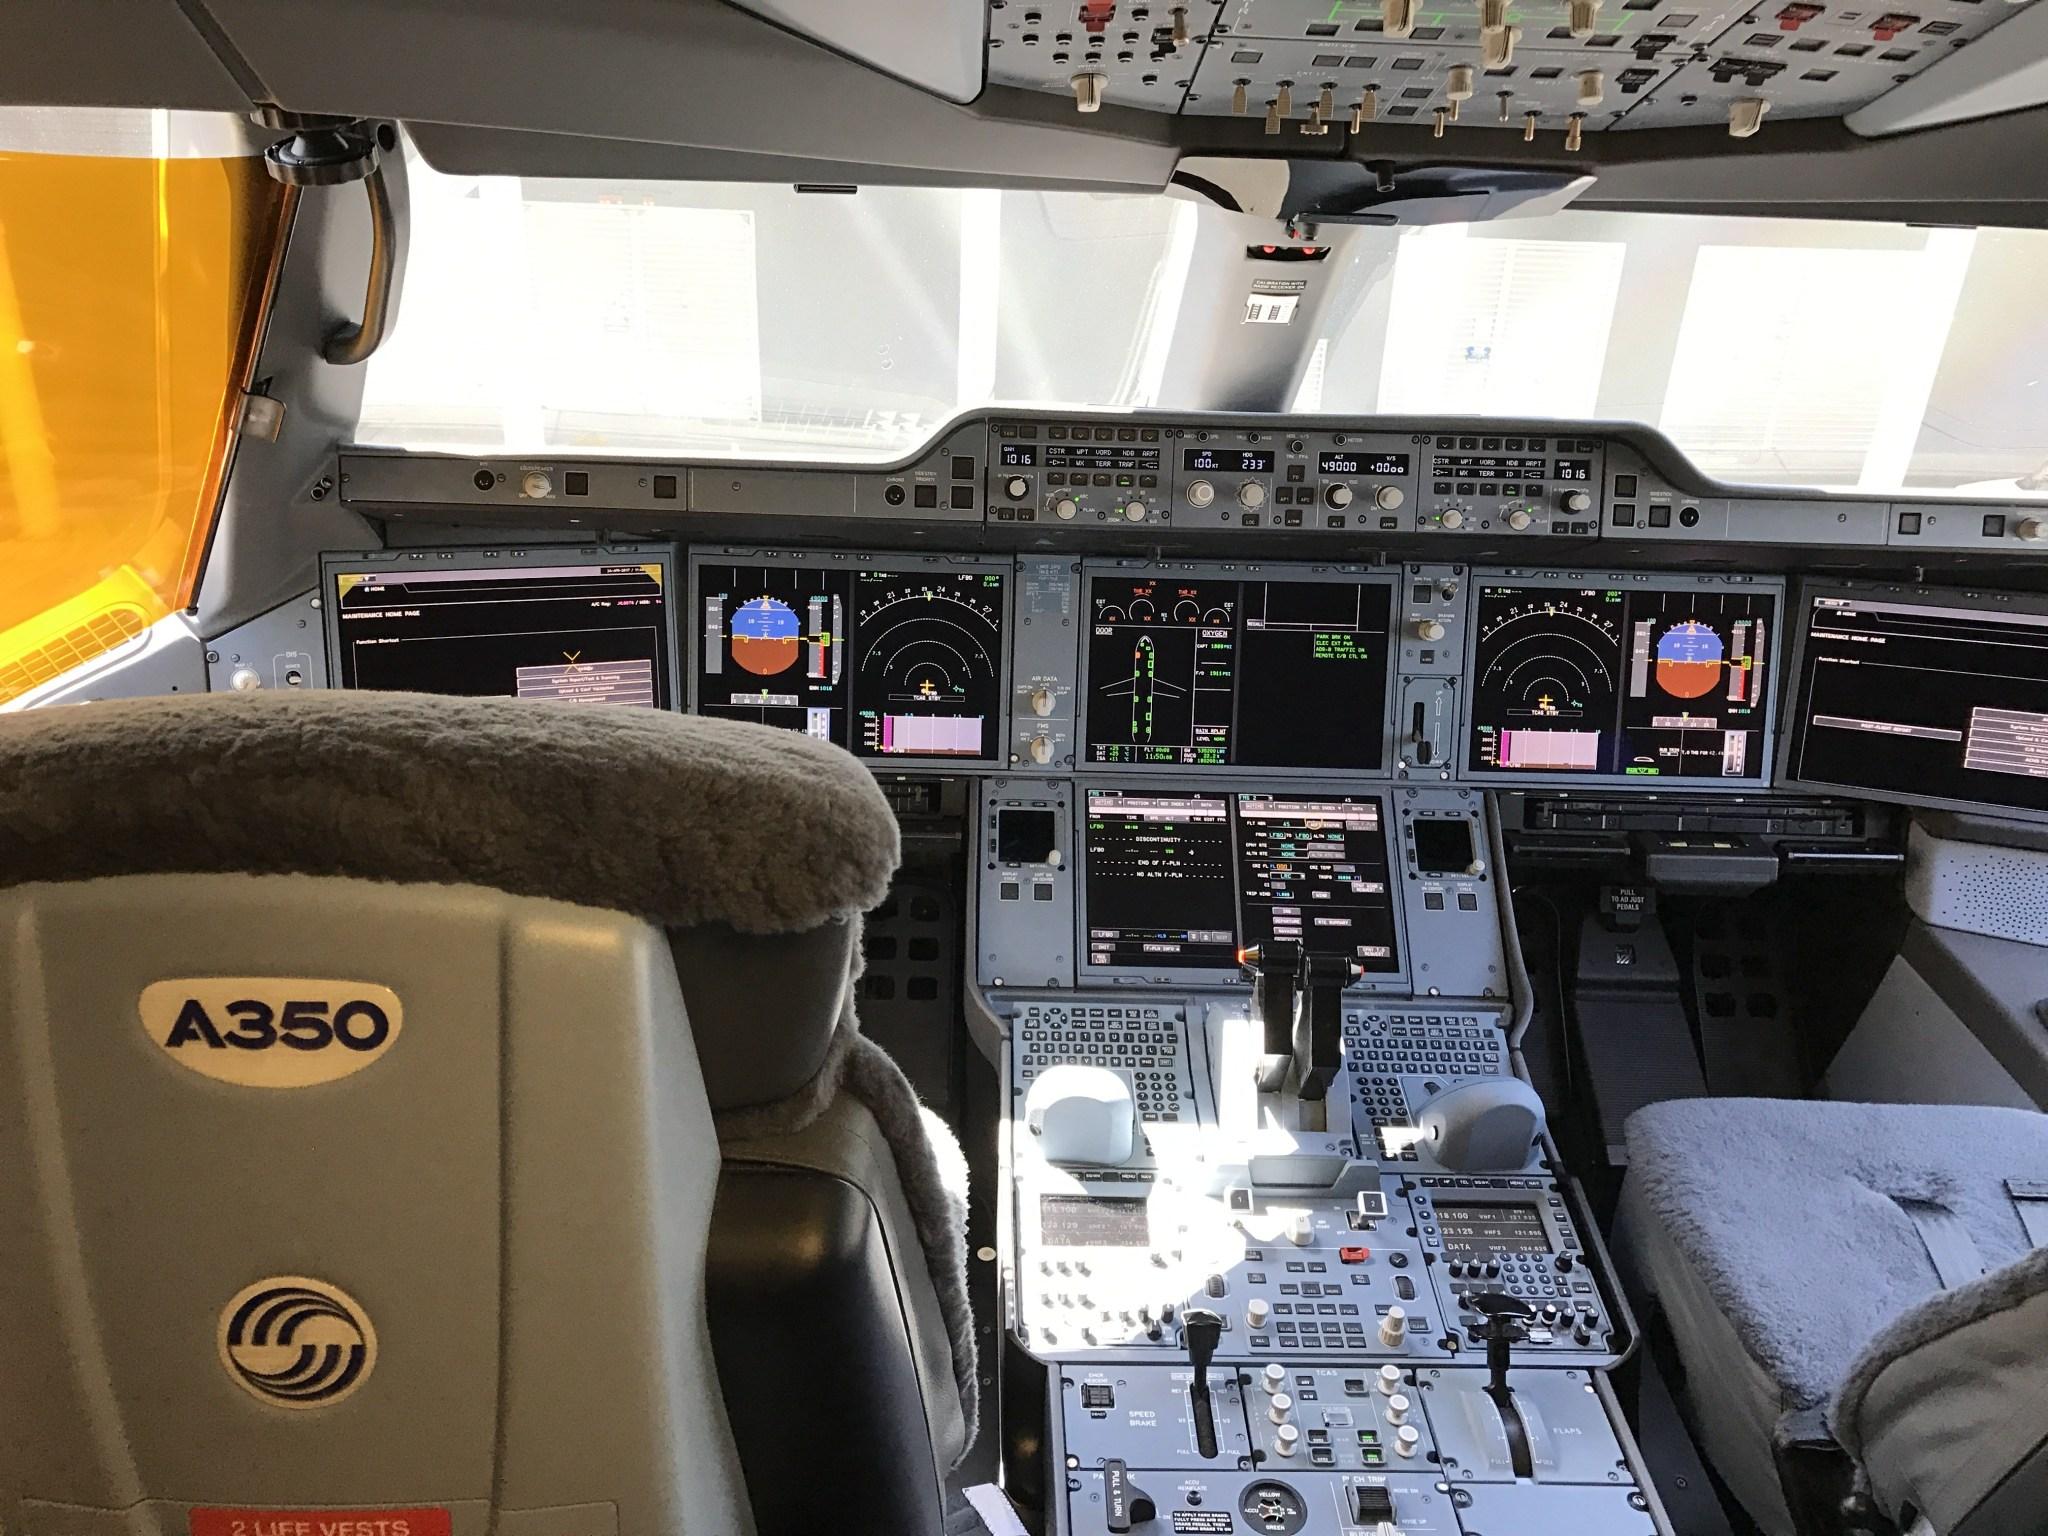 How to Tell an A350- the Newest Airbus, Apart